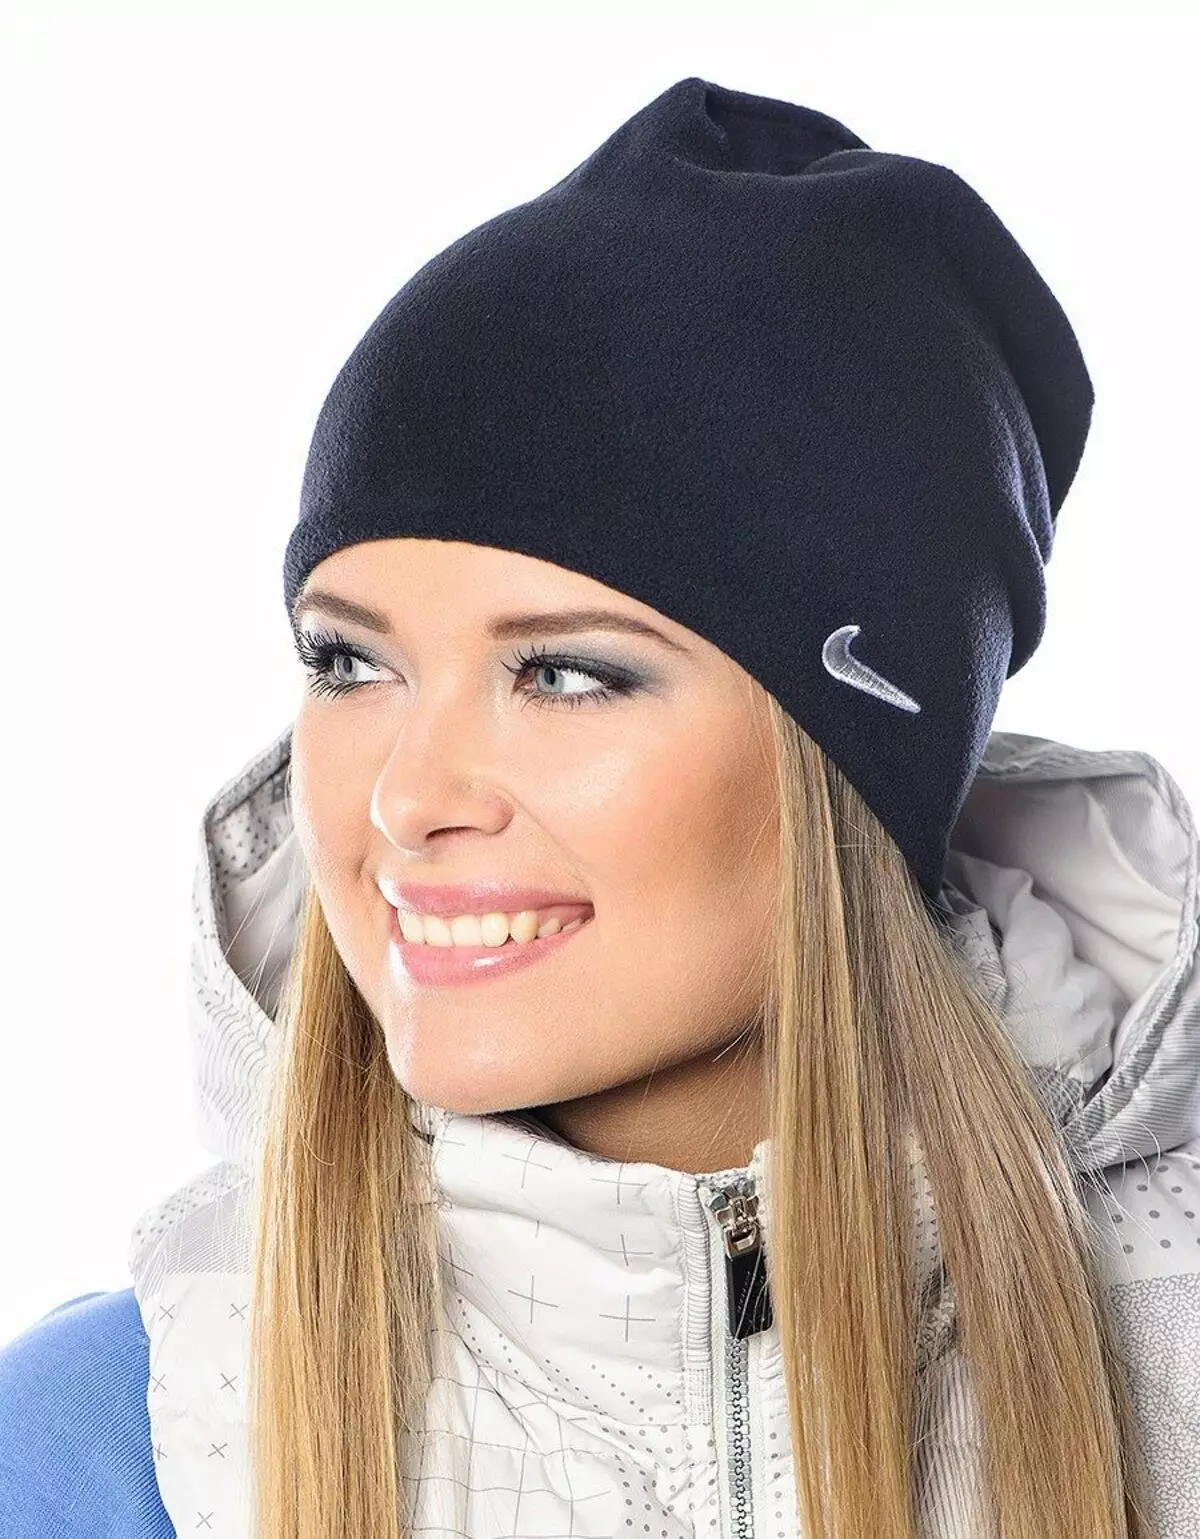 How to choose a hat (89 photos): Select the model in color and type of face, for running 2990_80